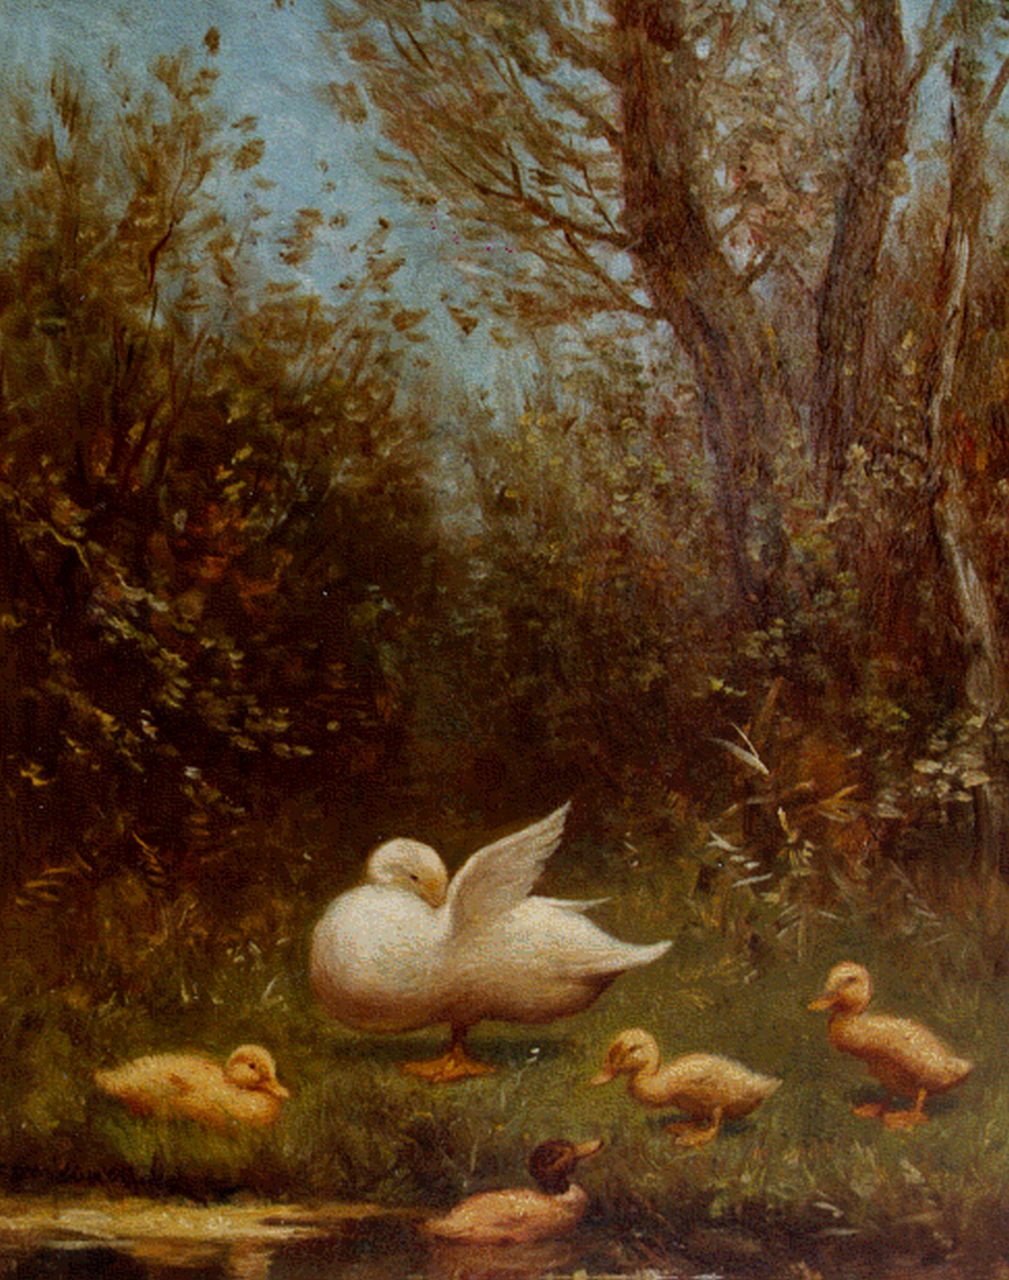 Artz C.D.L.  | 'Constant' David Ludovic Artz, Duck with ducklings on the riverbank, oil on panel 24.1 x 18.1 cm, signed l.l.